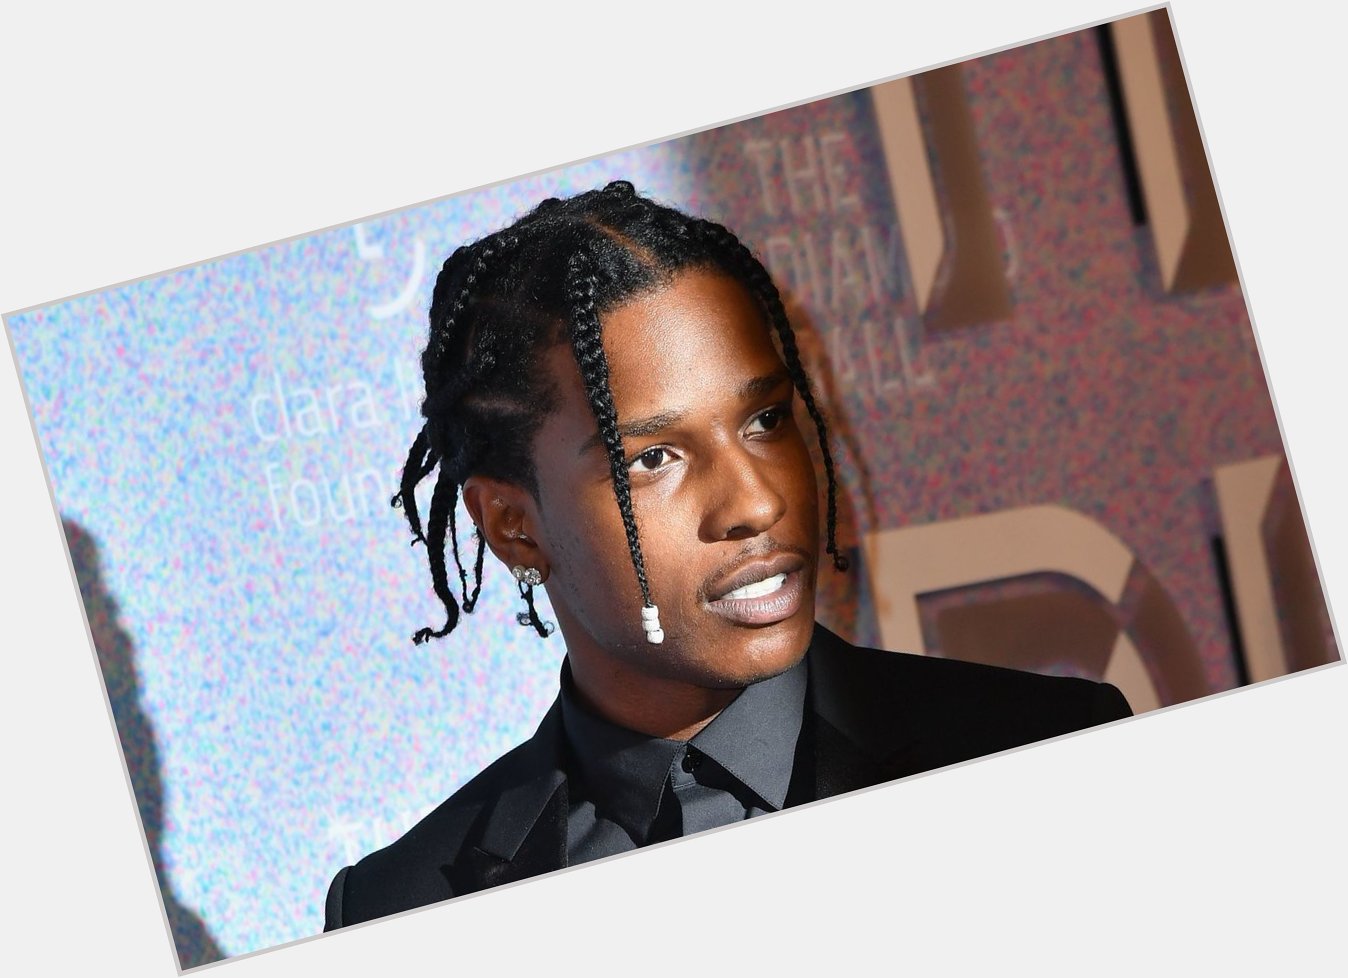 HAPPY BIRTHDAY TO ASAP ROCKY WHO IS 33 YEARS OLD!!!     